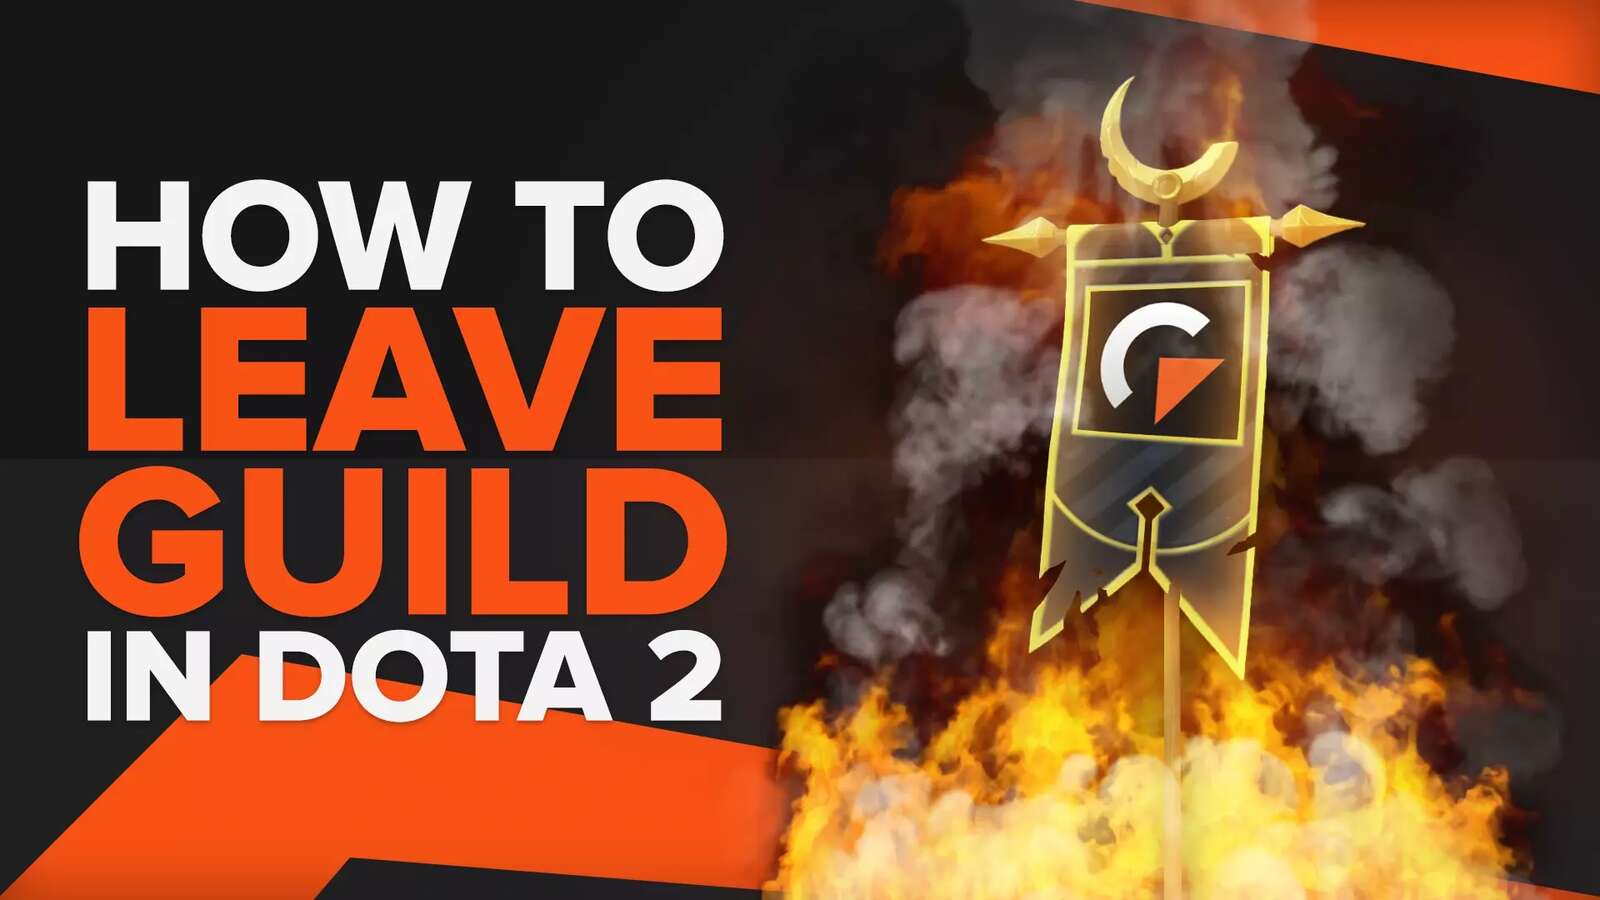 How to Leave Guild in Dota 2 (in 2 Simple Steps)